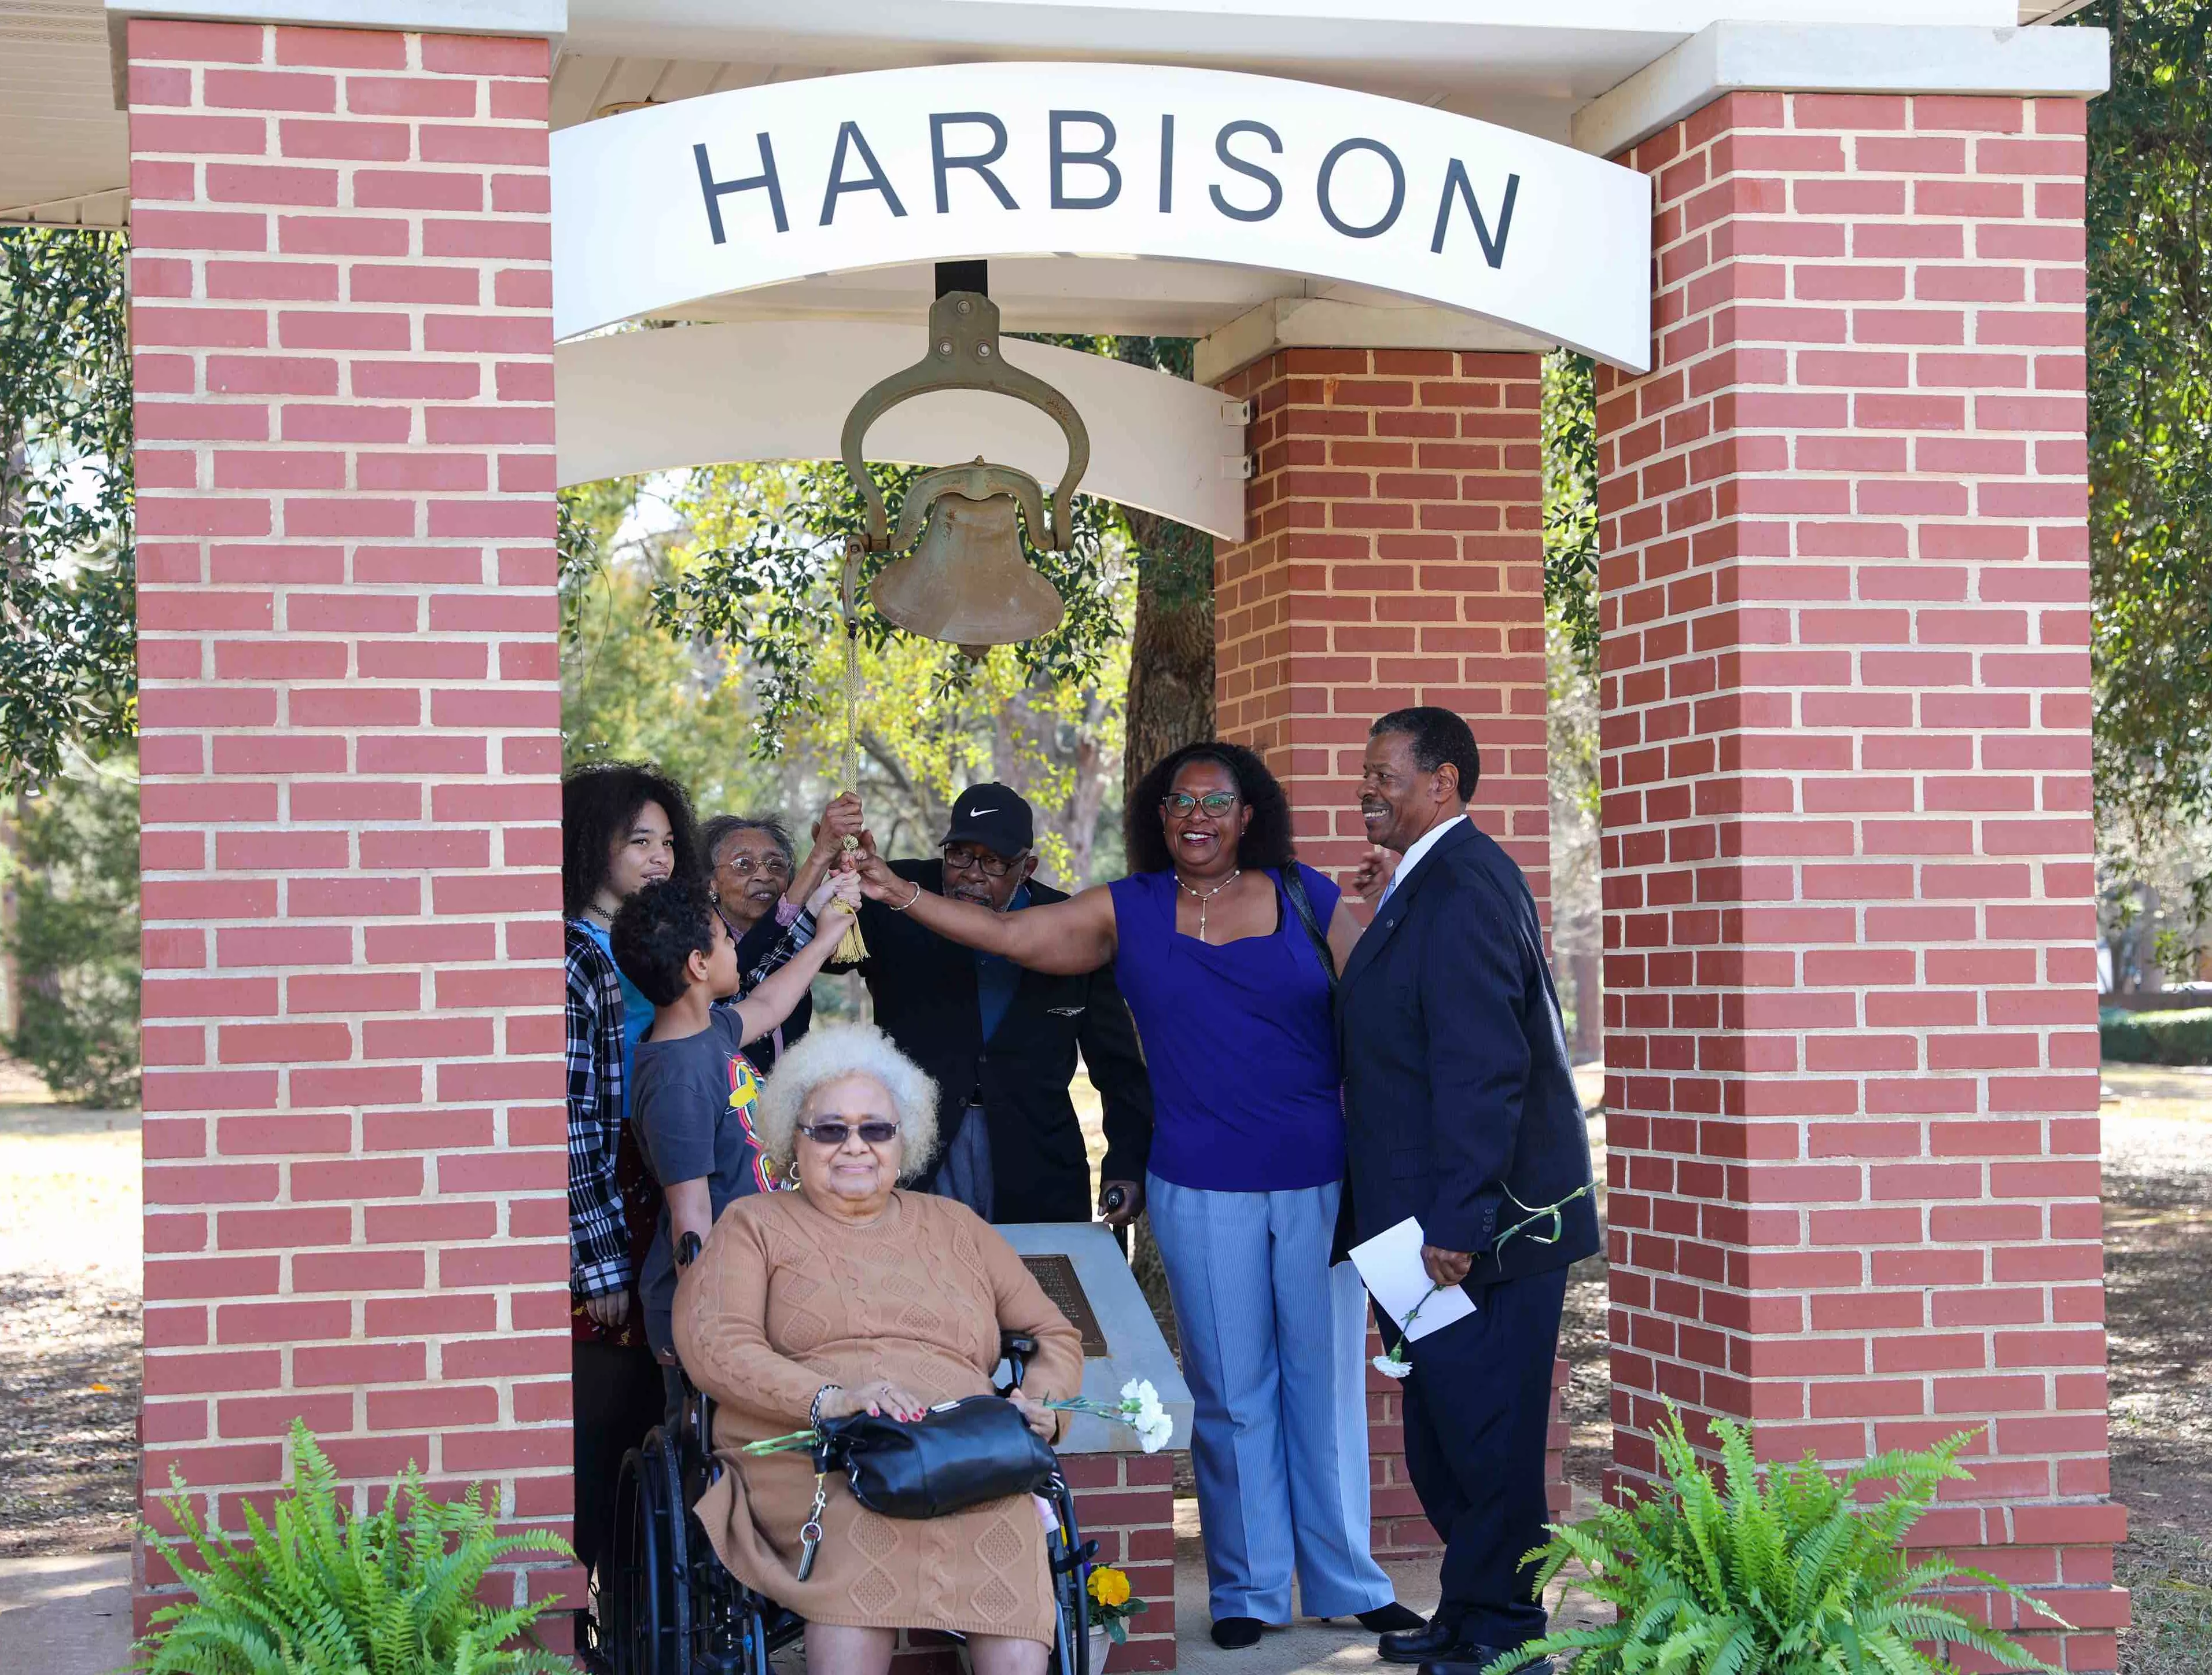 The ringing of the bell to commemorate Harbison History Day.